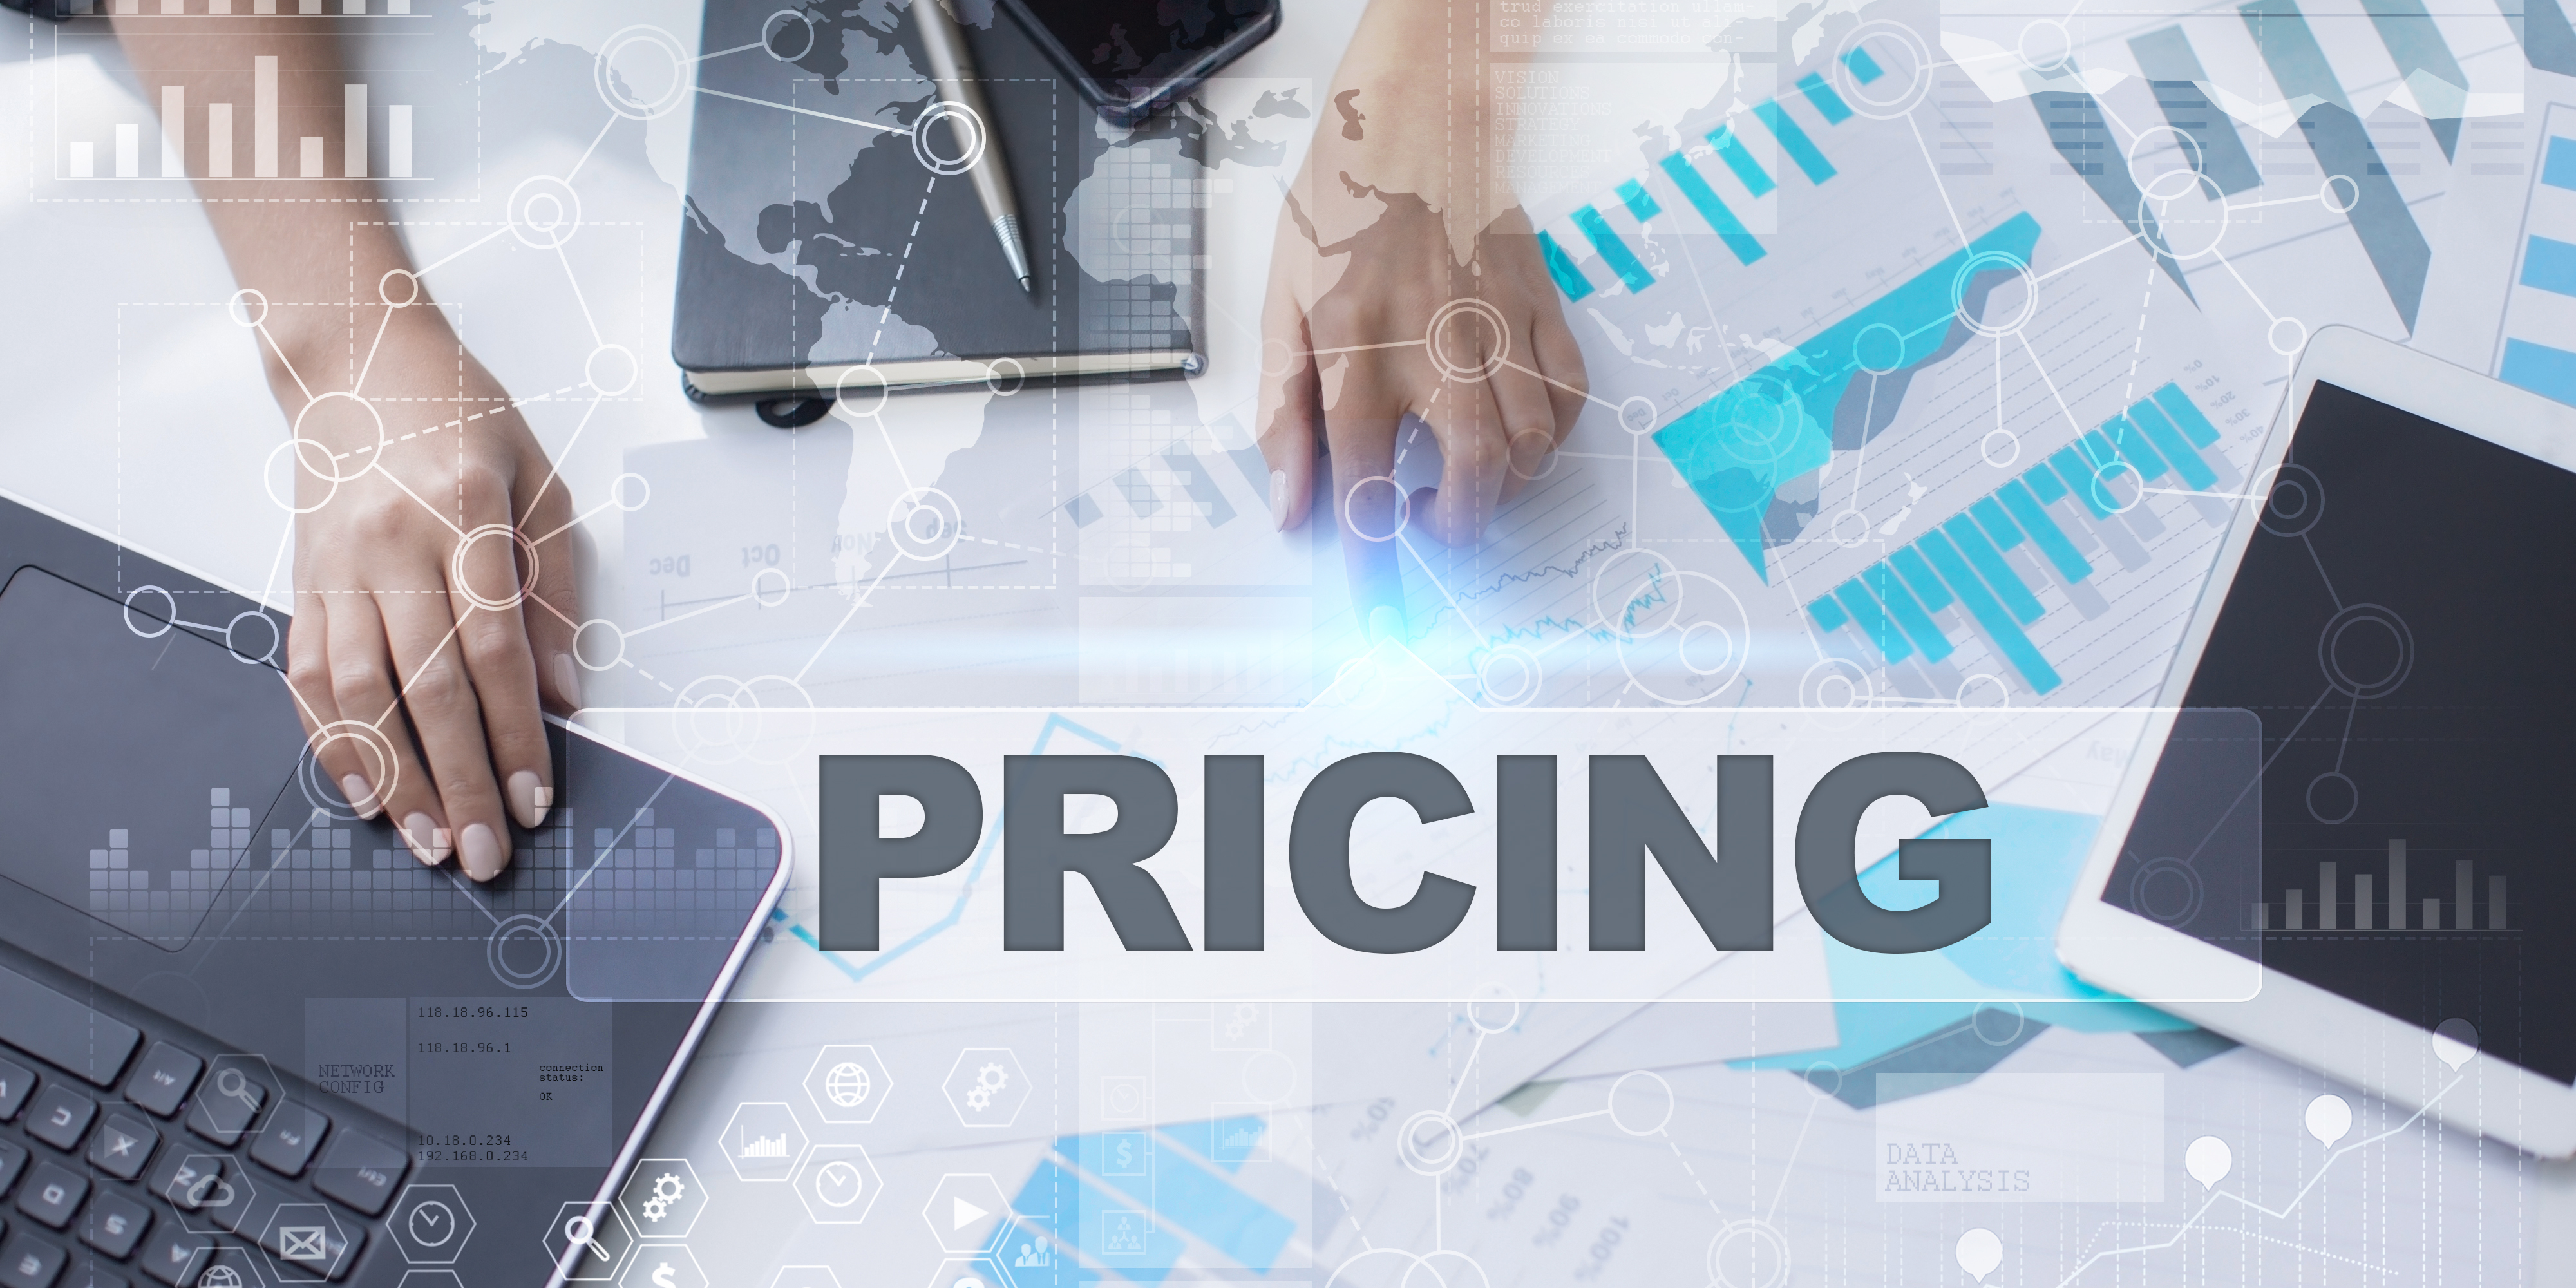 Improve Your Pricing Strategy With 3 Key Steps